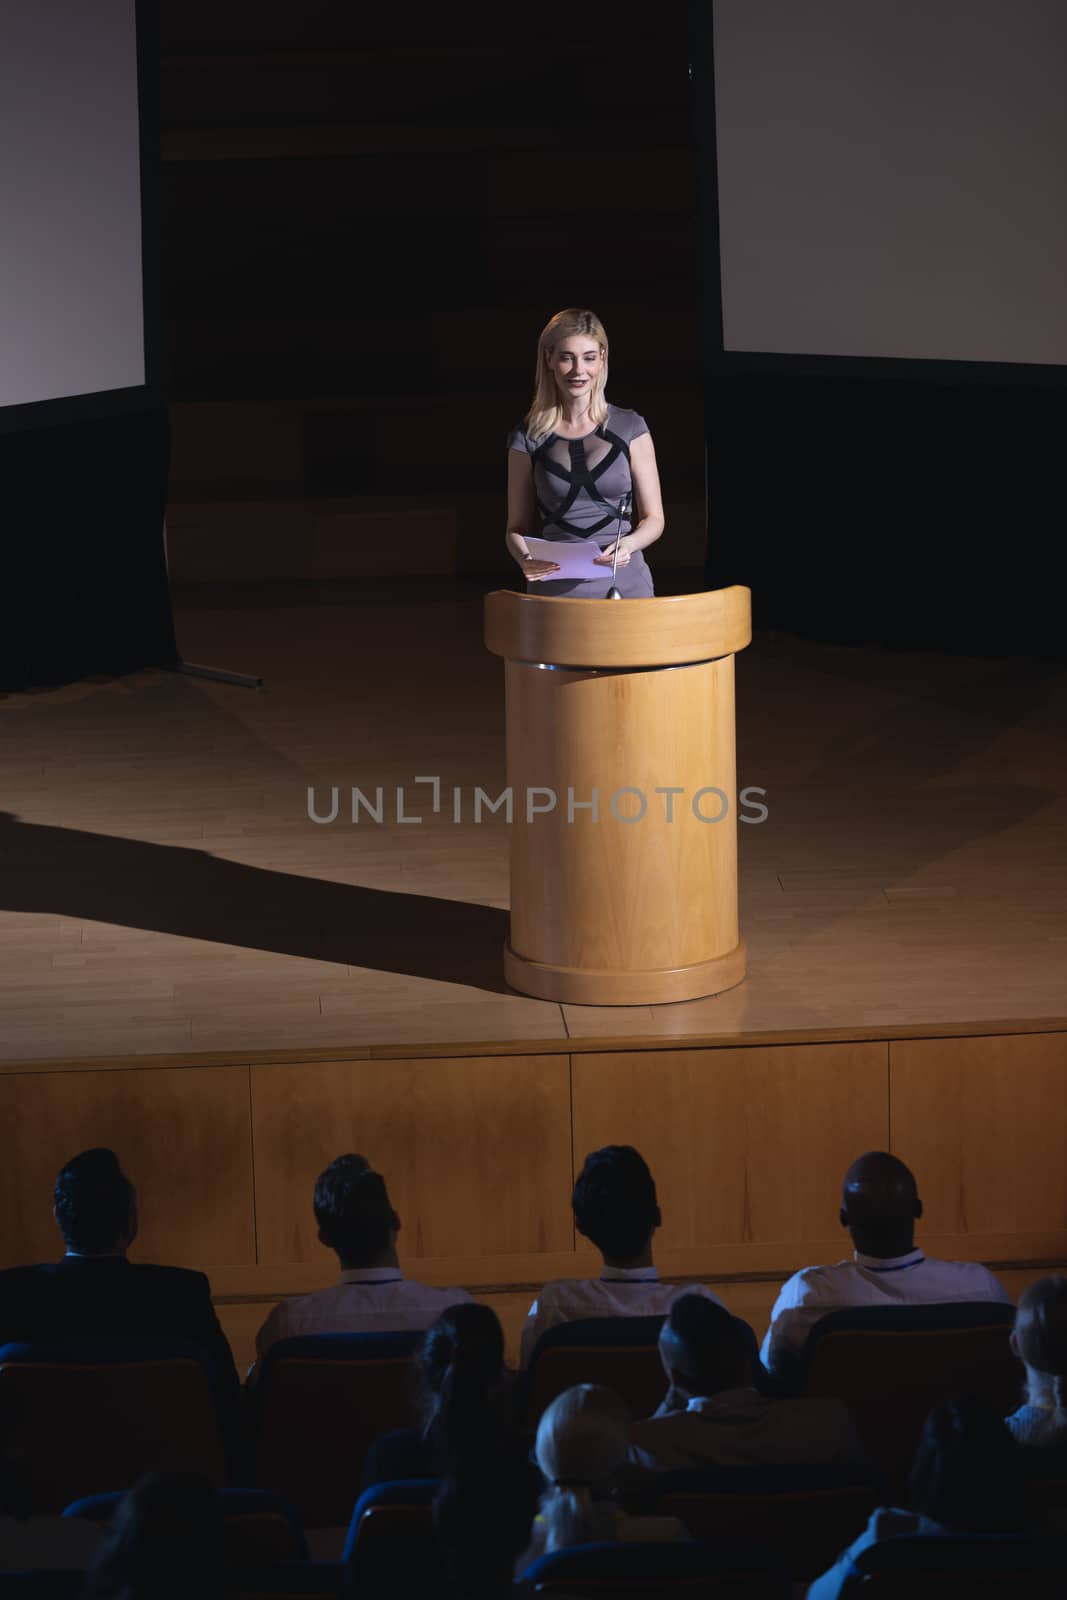 Hight view of blonde Caucasian businesswoman standing around podium and giving presentation to the audience in auditorium